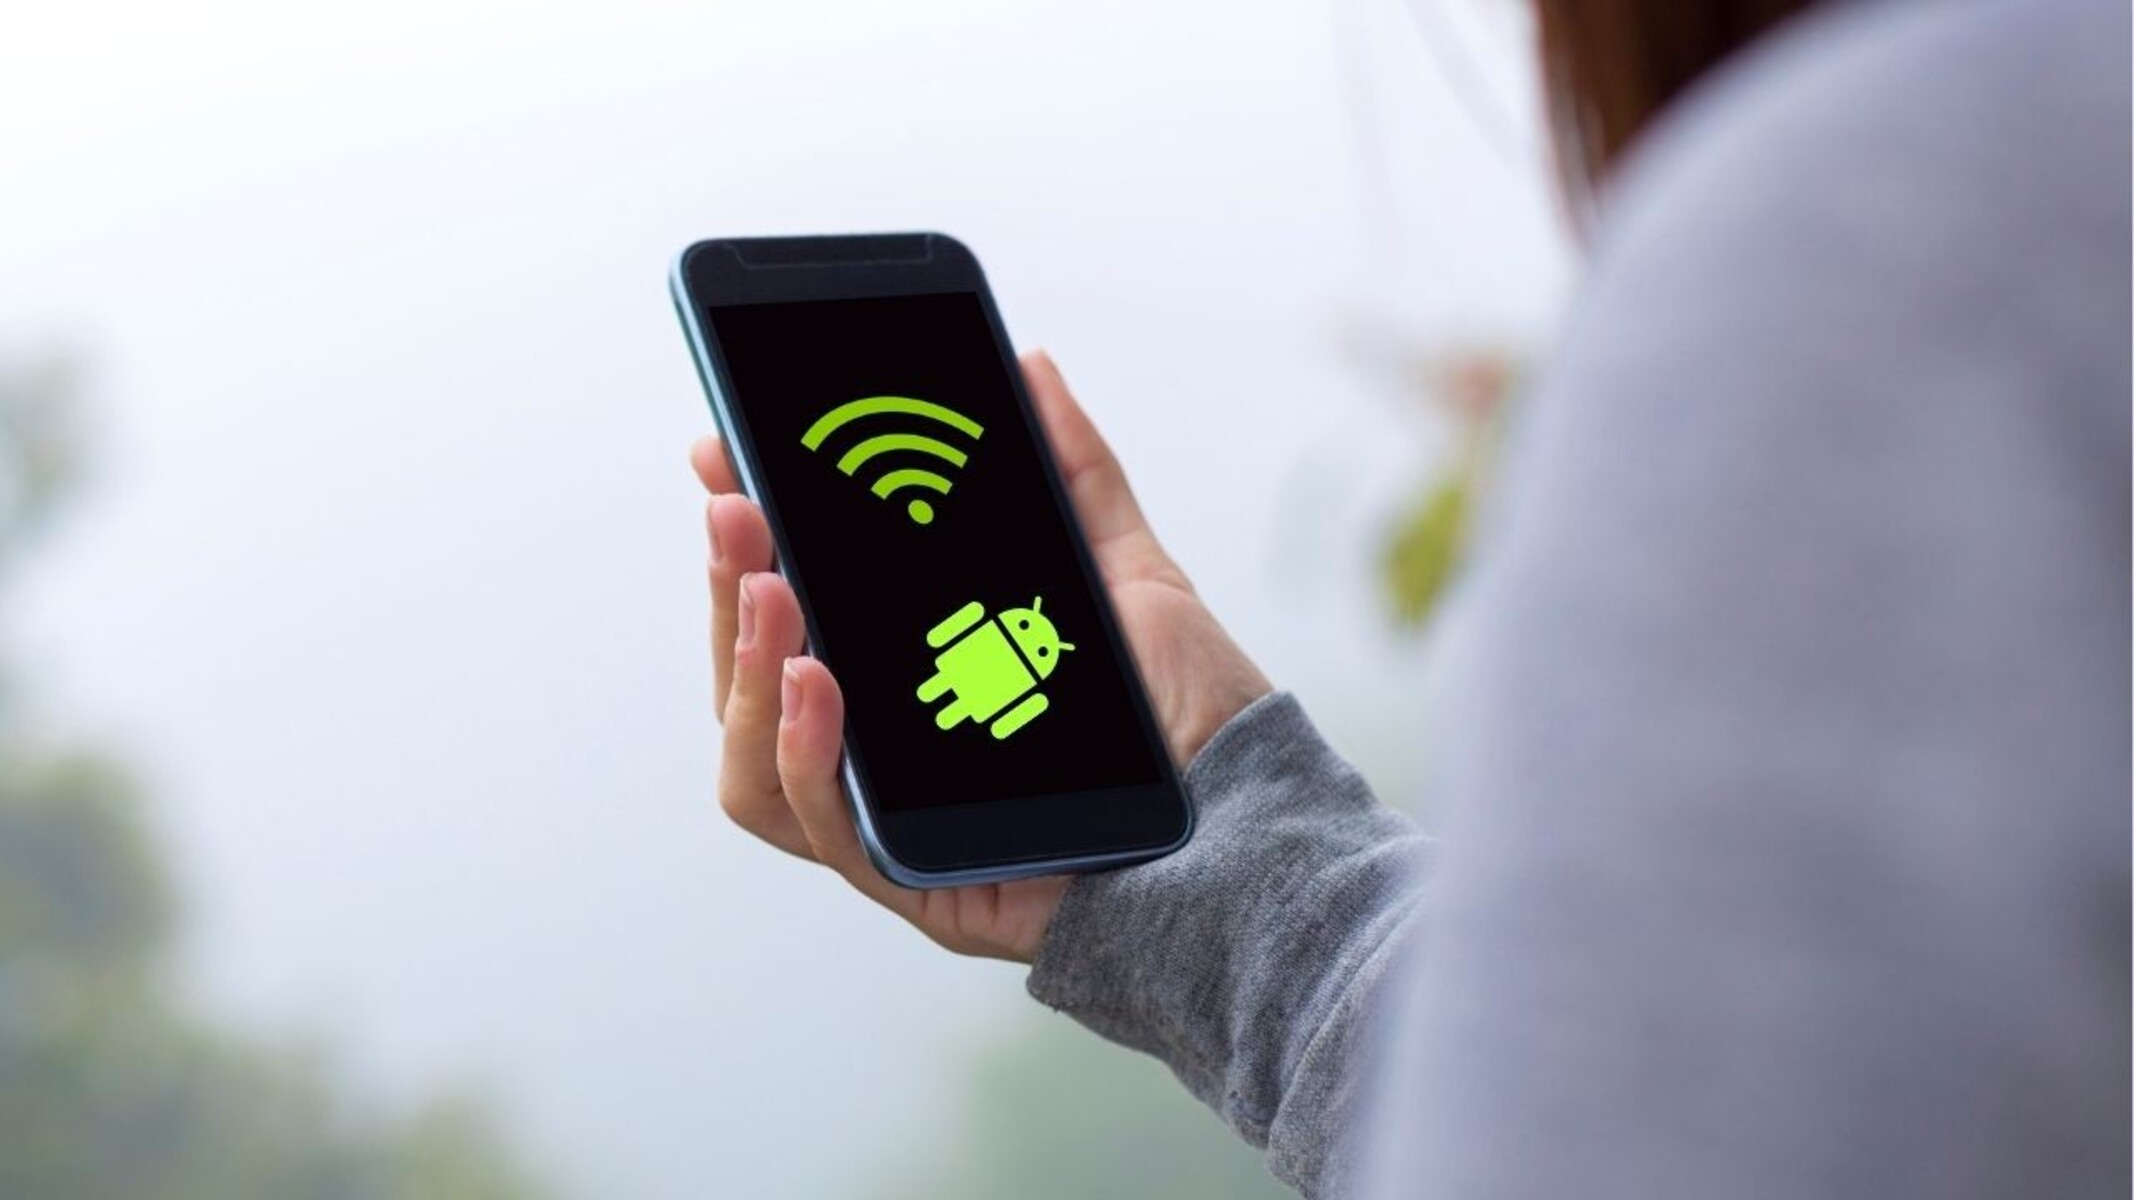 Cost-Free Connectivity: Using Hotspot On Android For Free